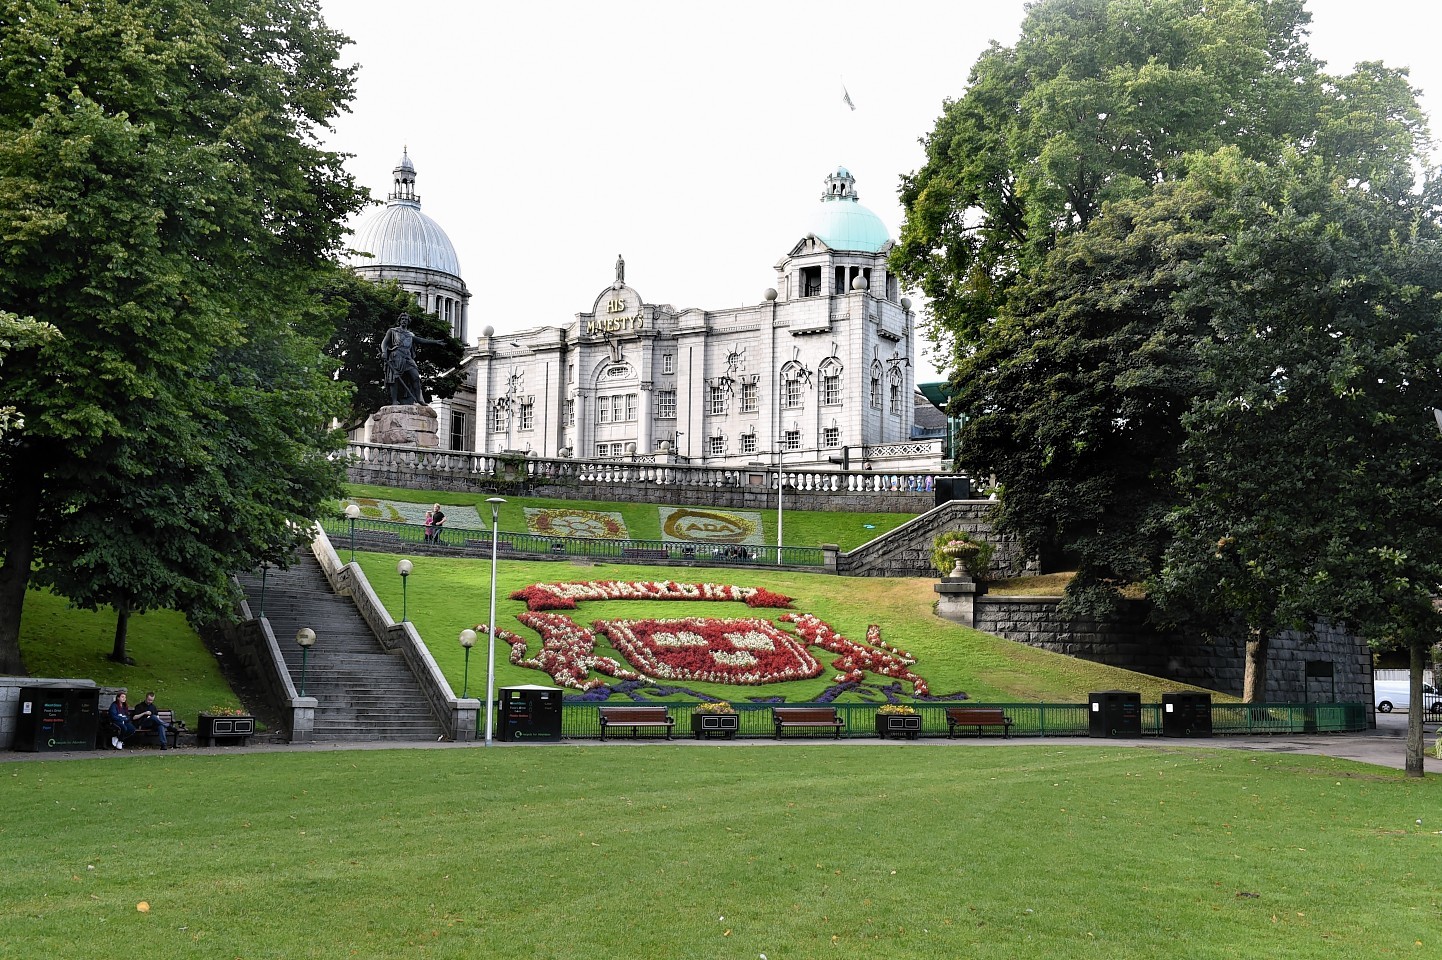 Union Terrace Gardens is in line for a £20 million revamp.